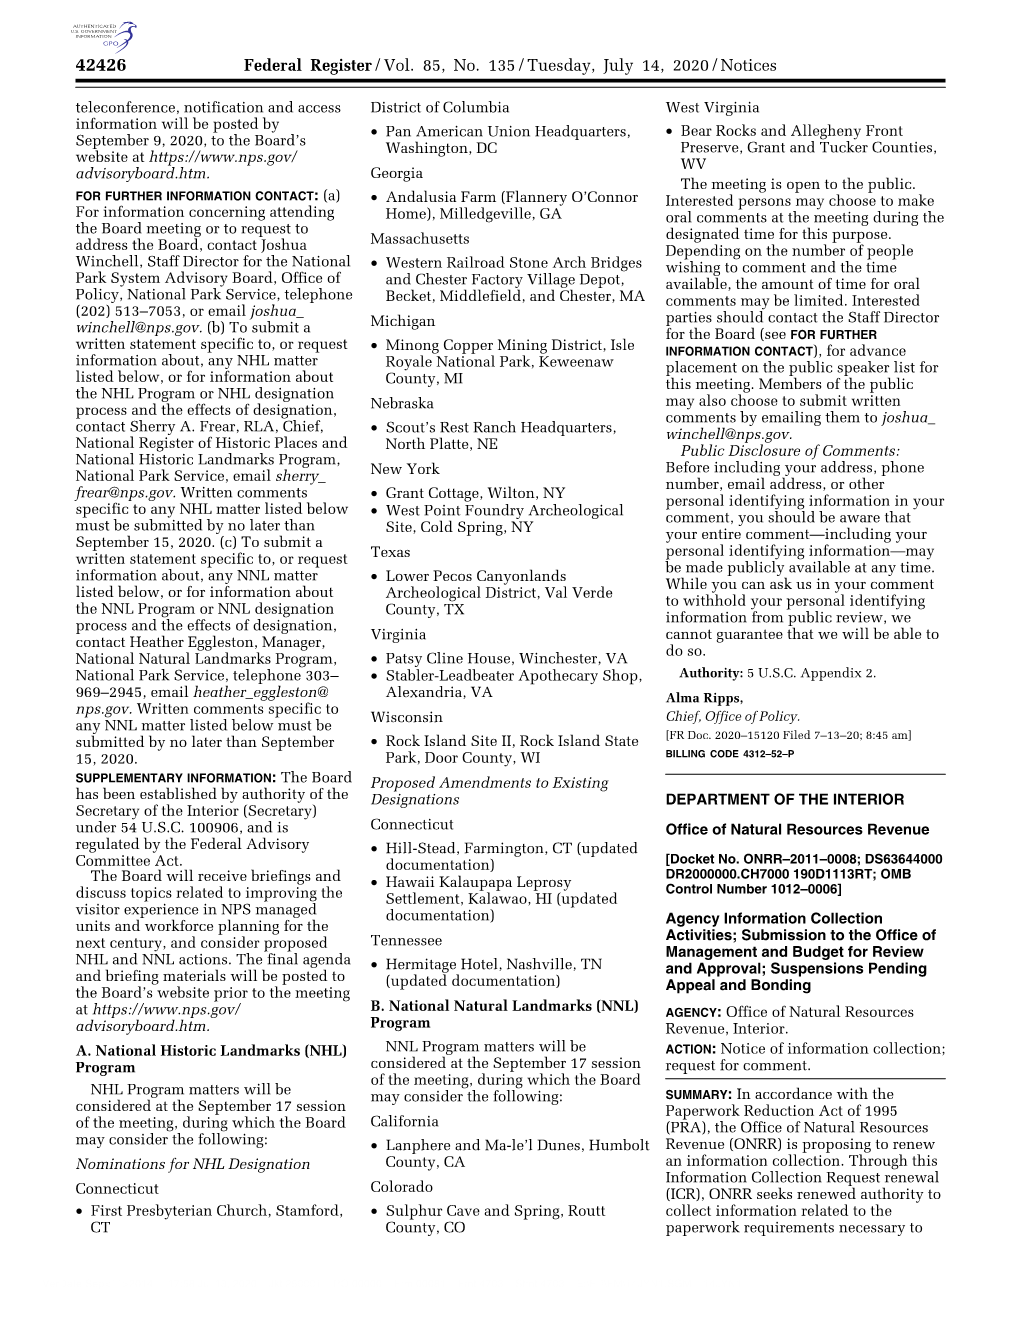 Federal Register/Vol. 85, No. 135/Tuesday, July 14, 2020/Notices